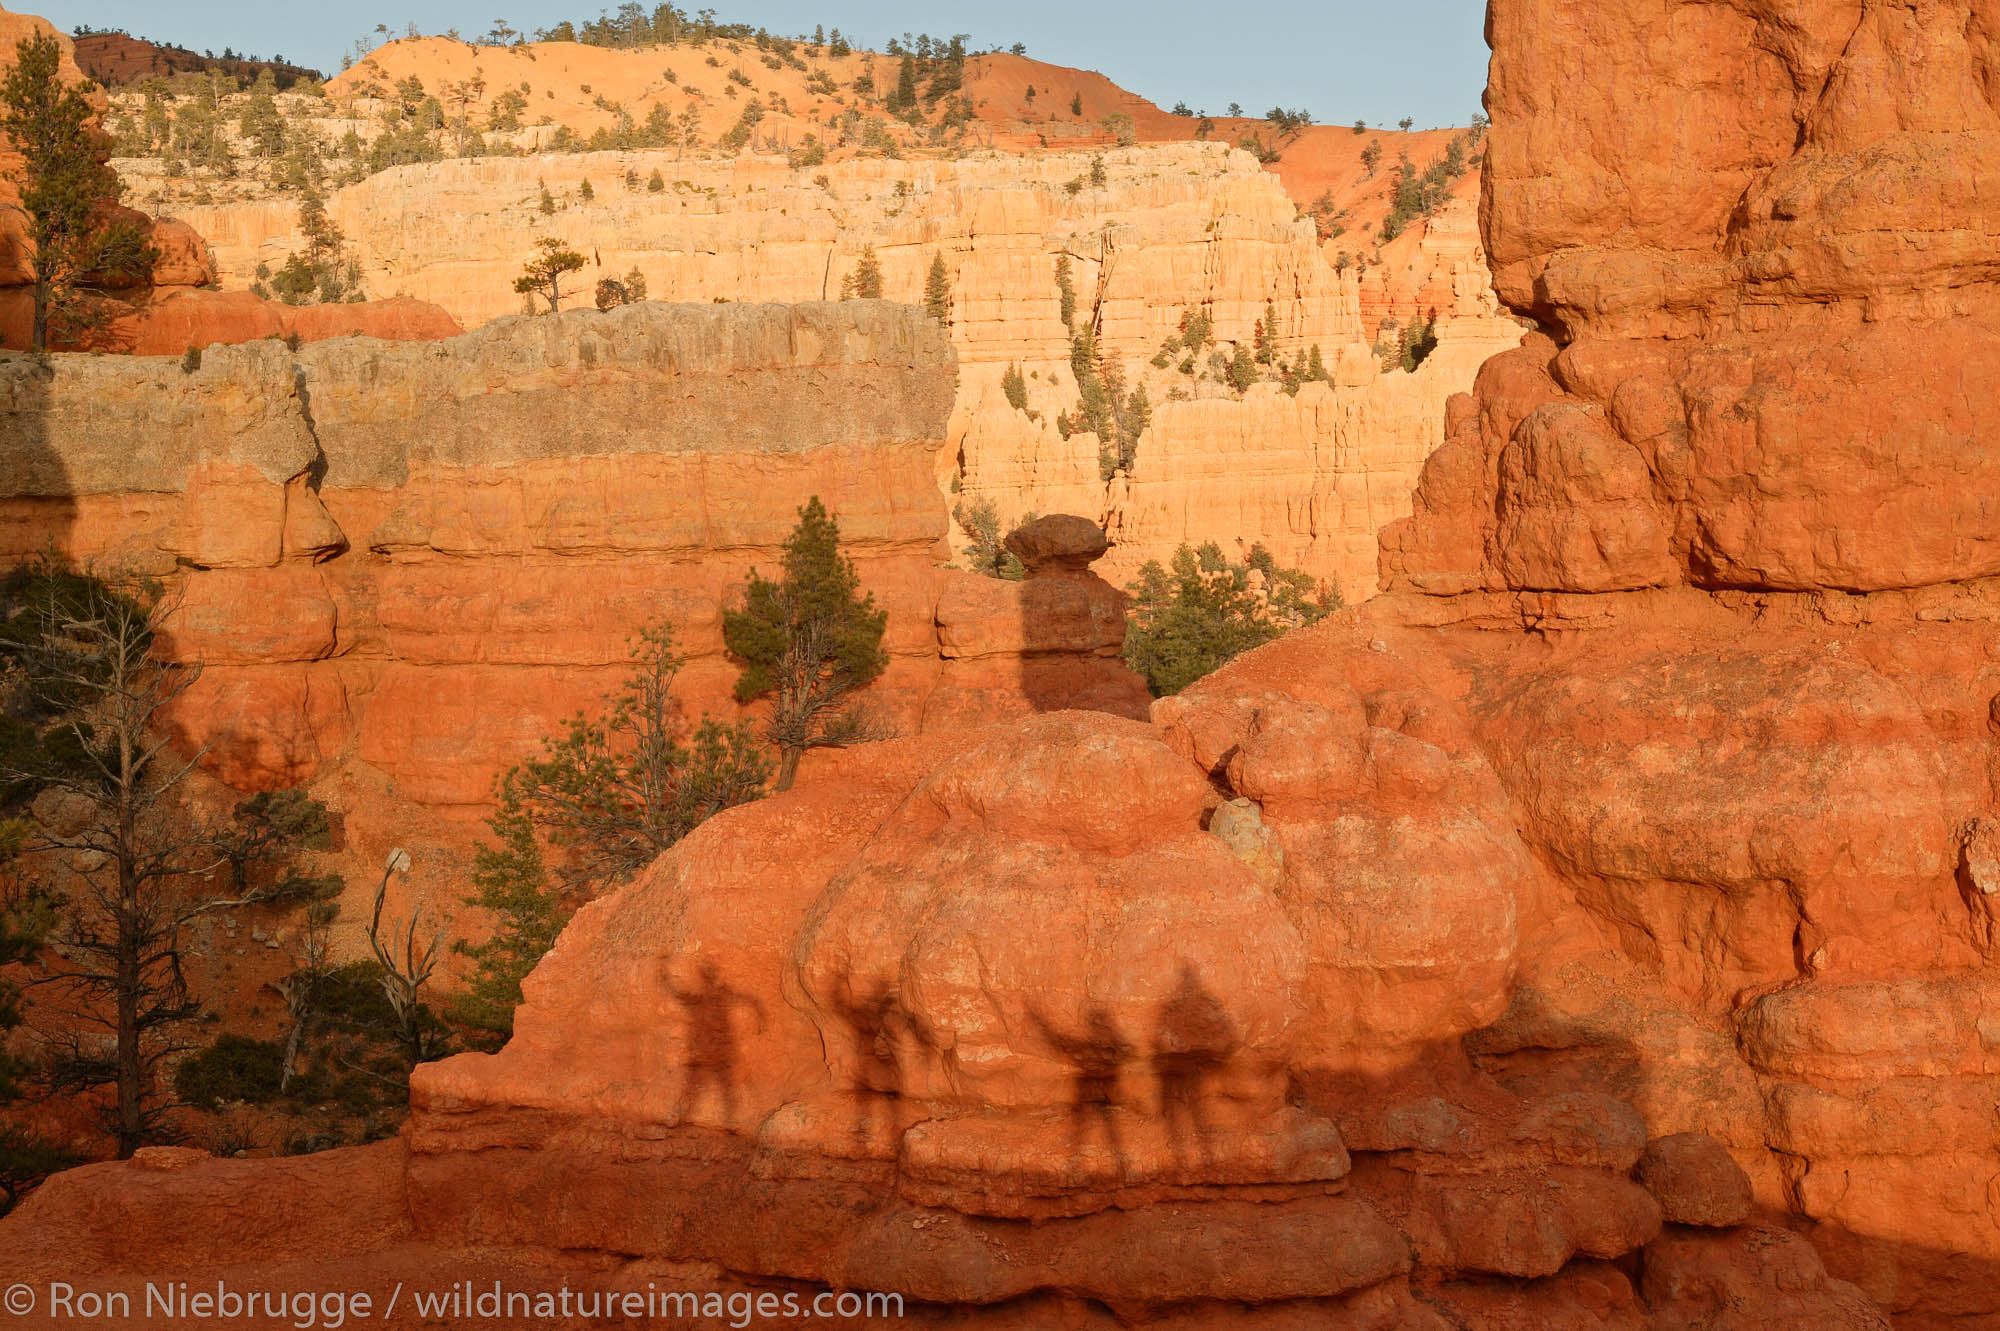 Visitor's shadows on the red rocks of Red Canyon, Dixie National Forest, Utah.